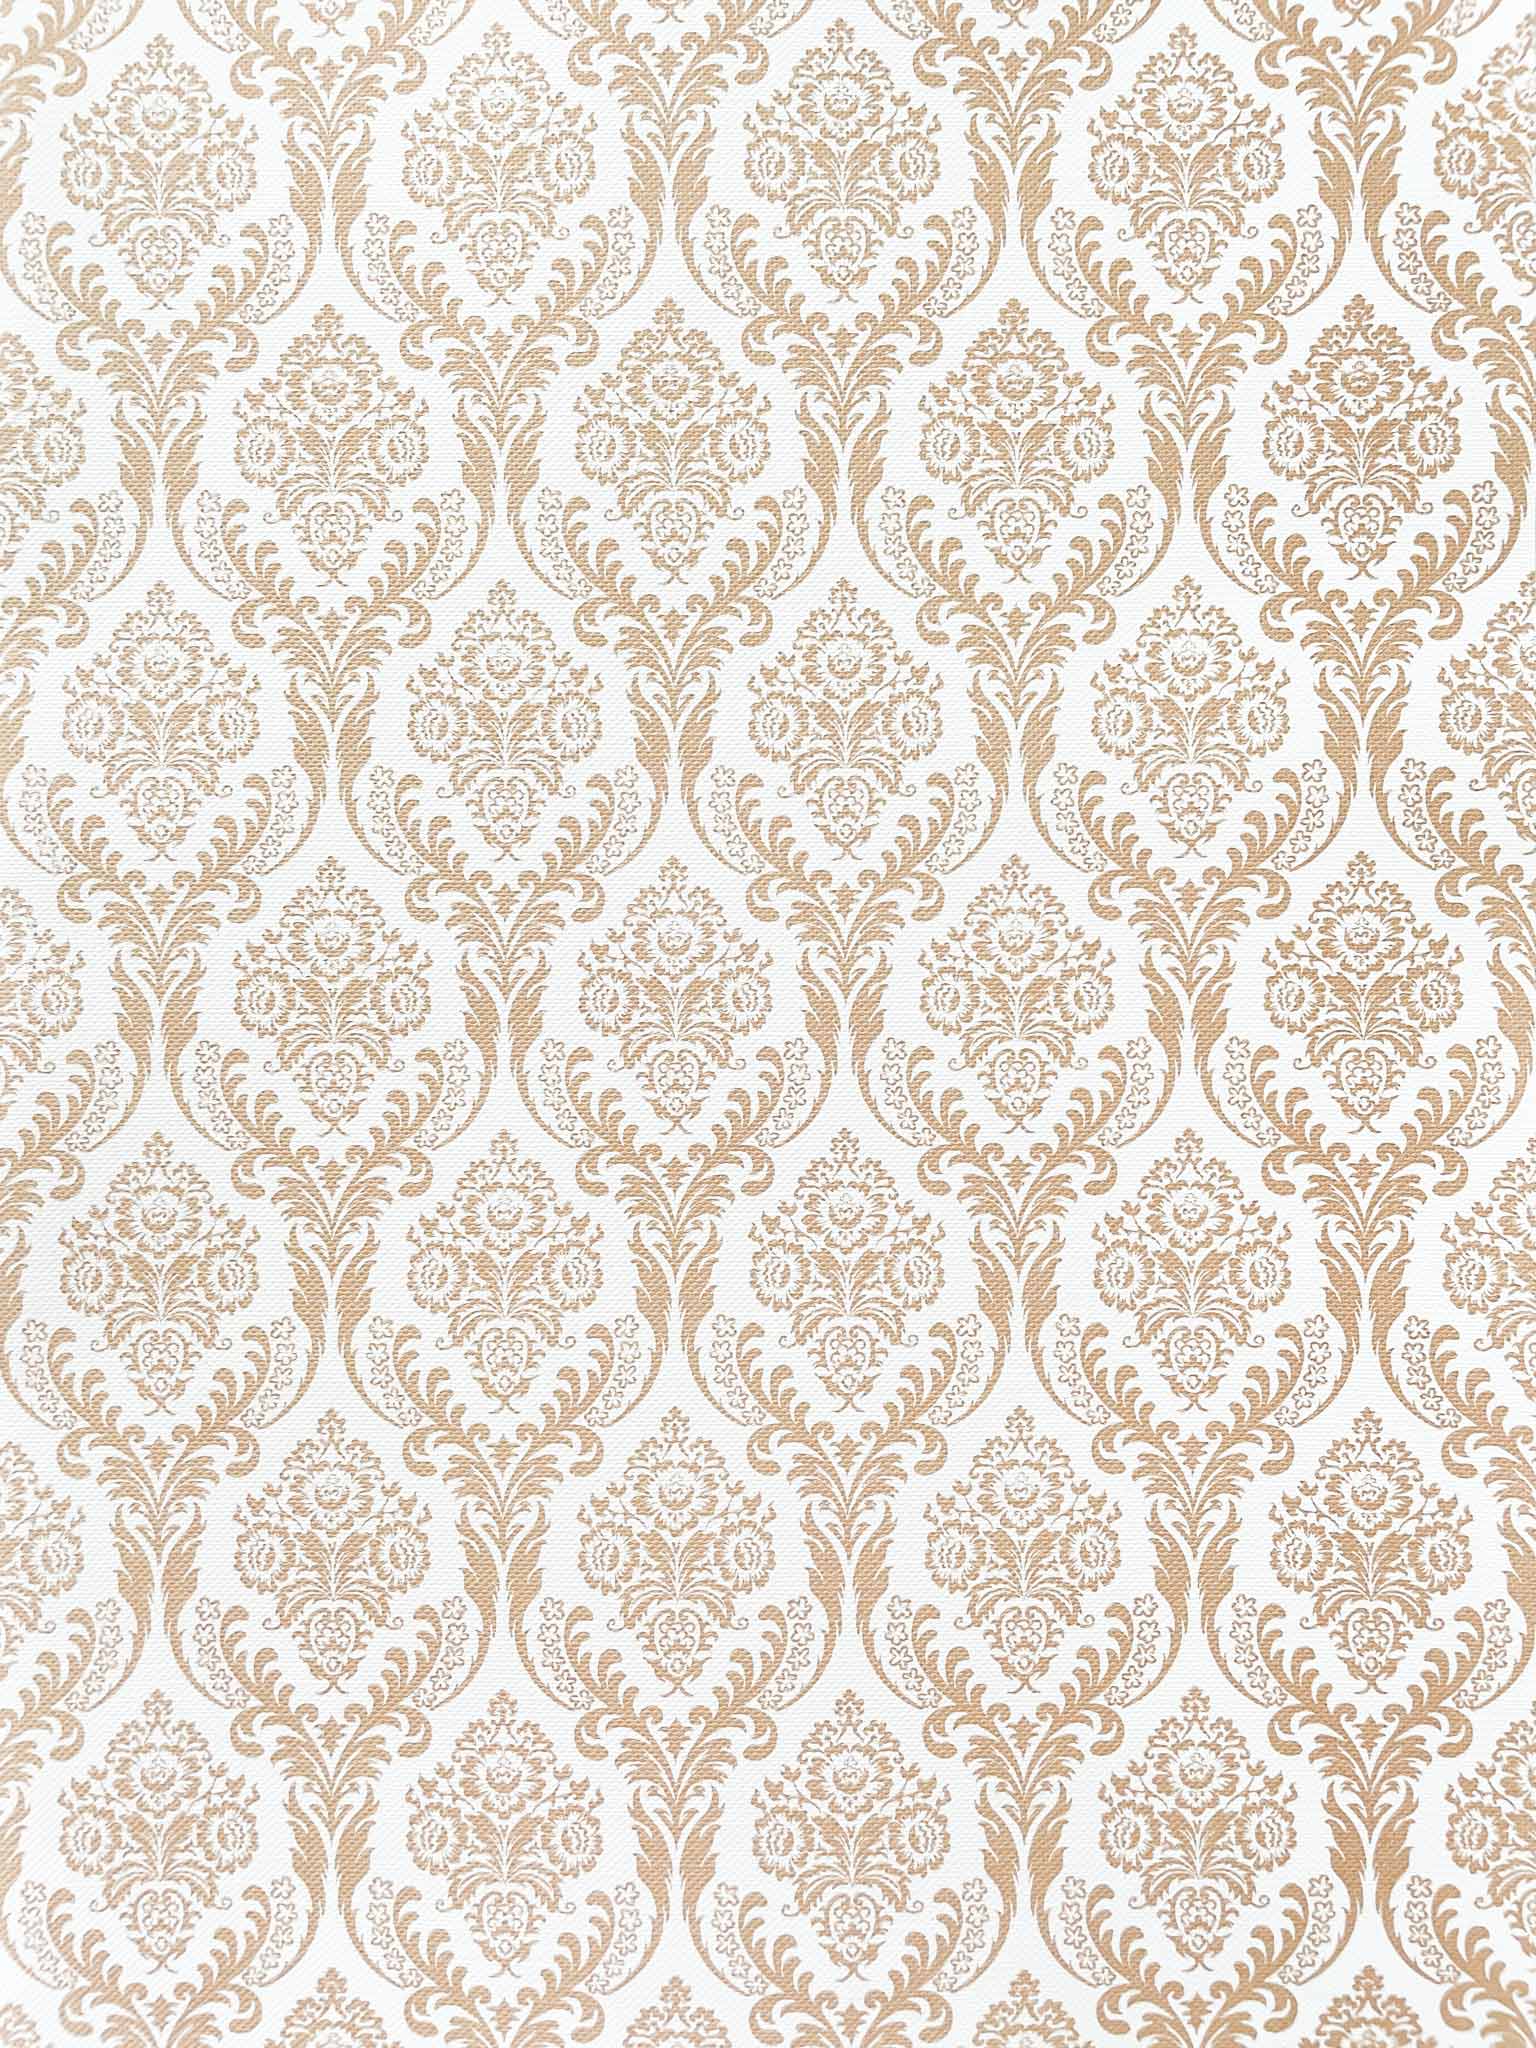 ascot-vintage-patterned-paper-in-neutral-colours